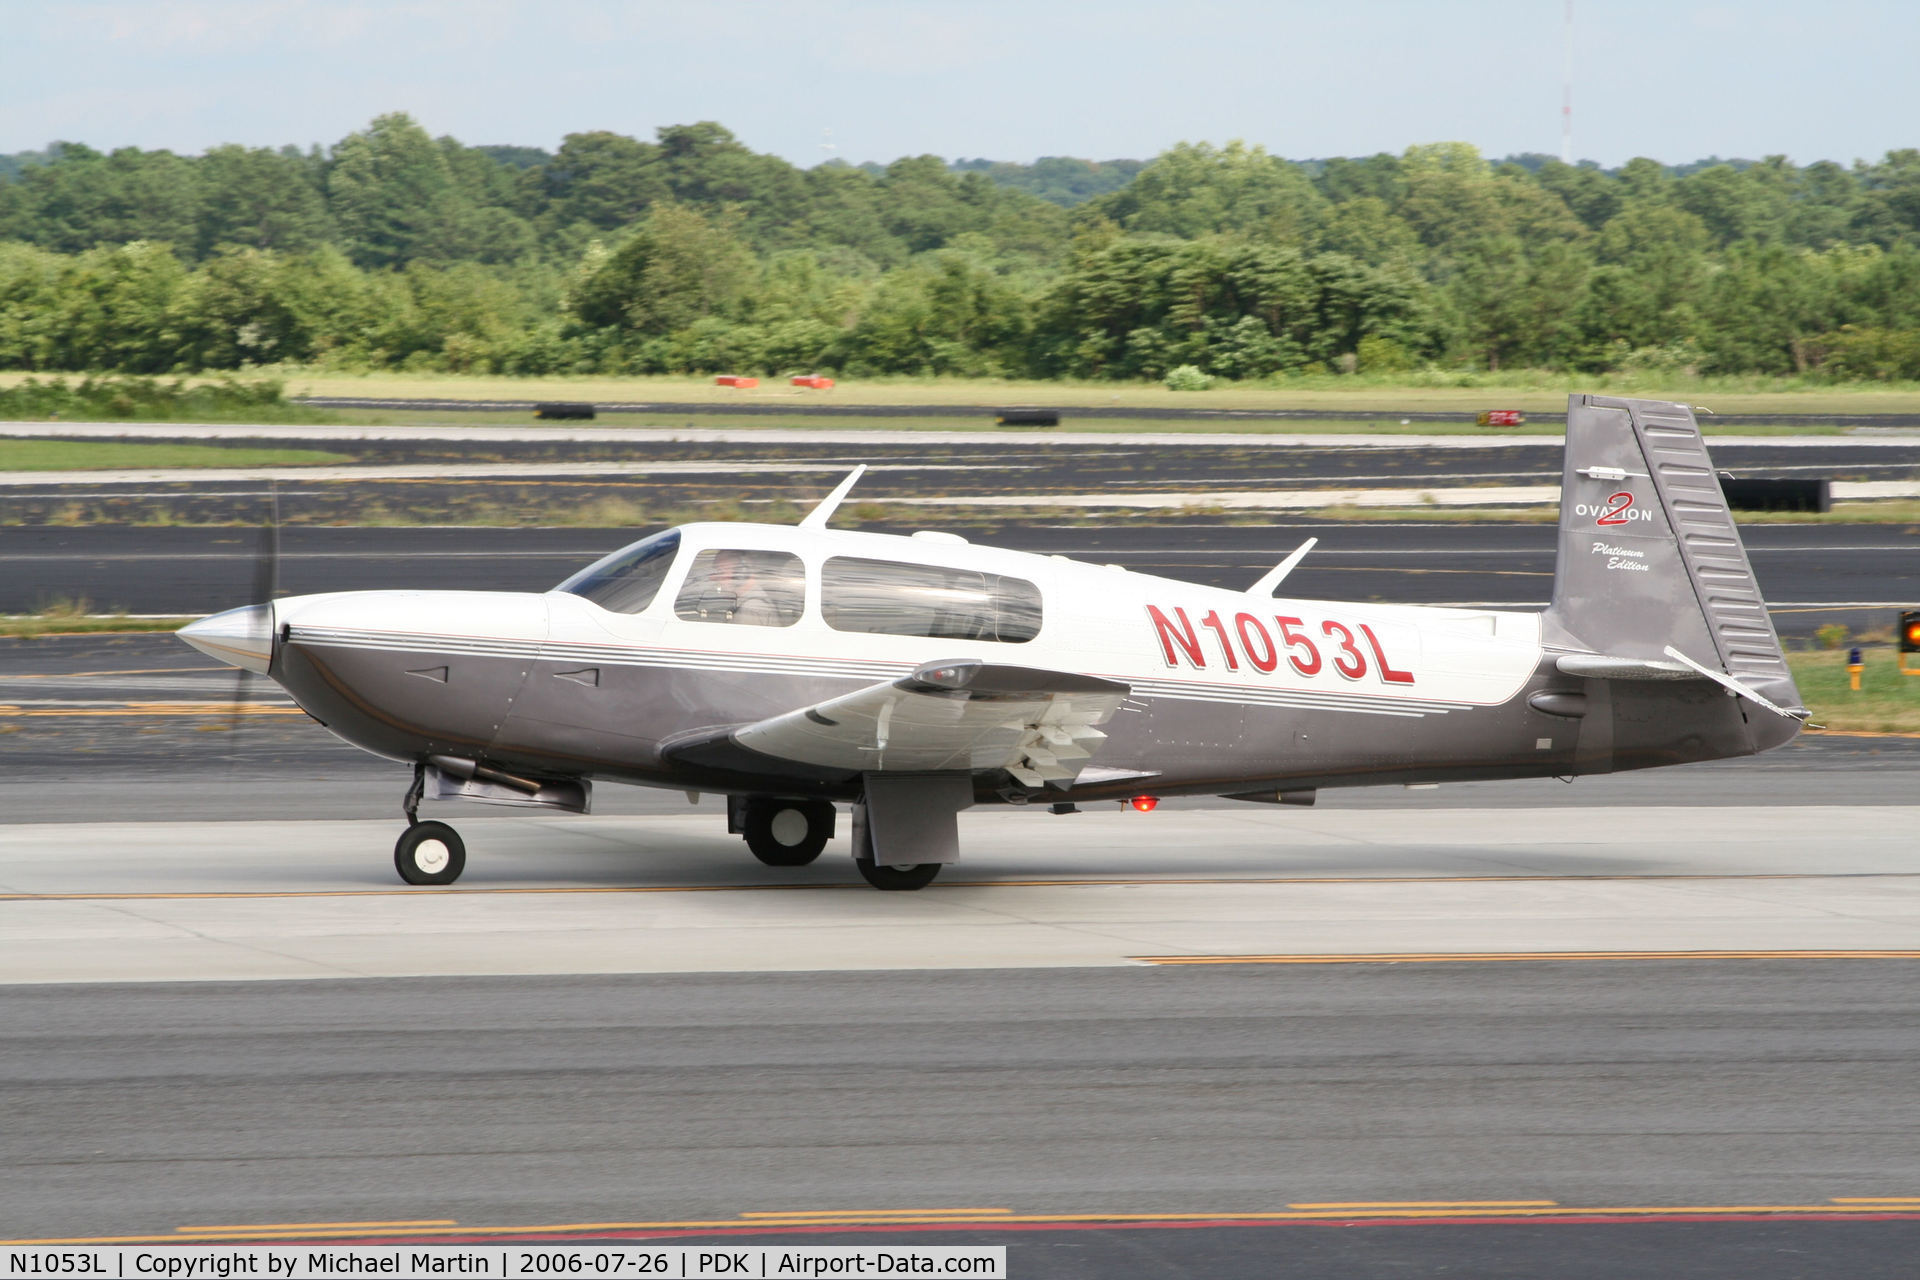 N1053L, 2000 Mooney M20R Ovation C/N 29-0261, Taxing to Epps Air Service